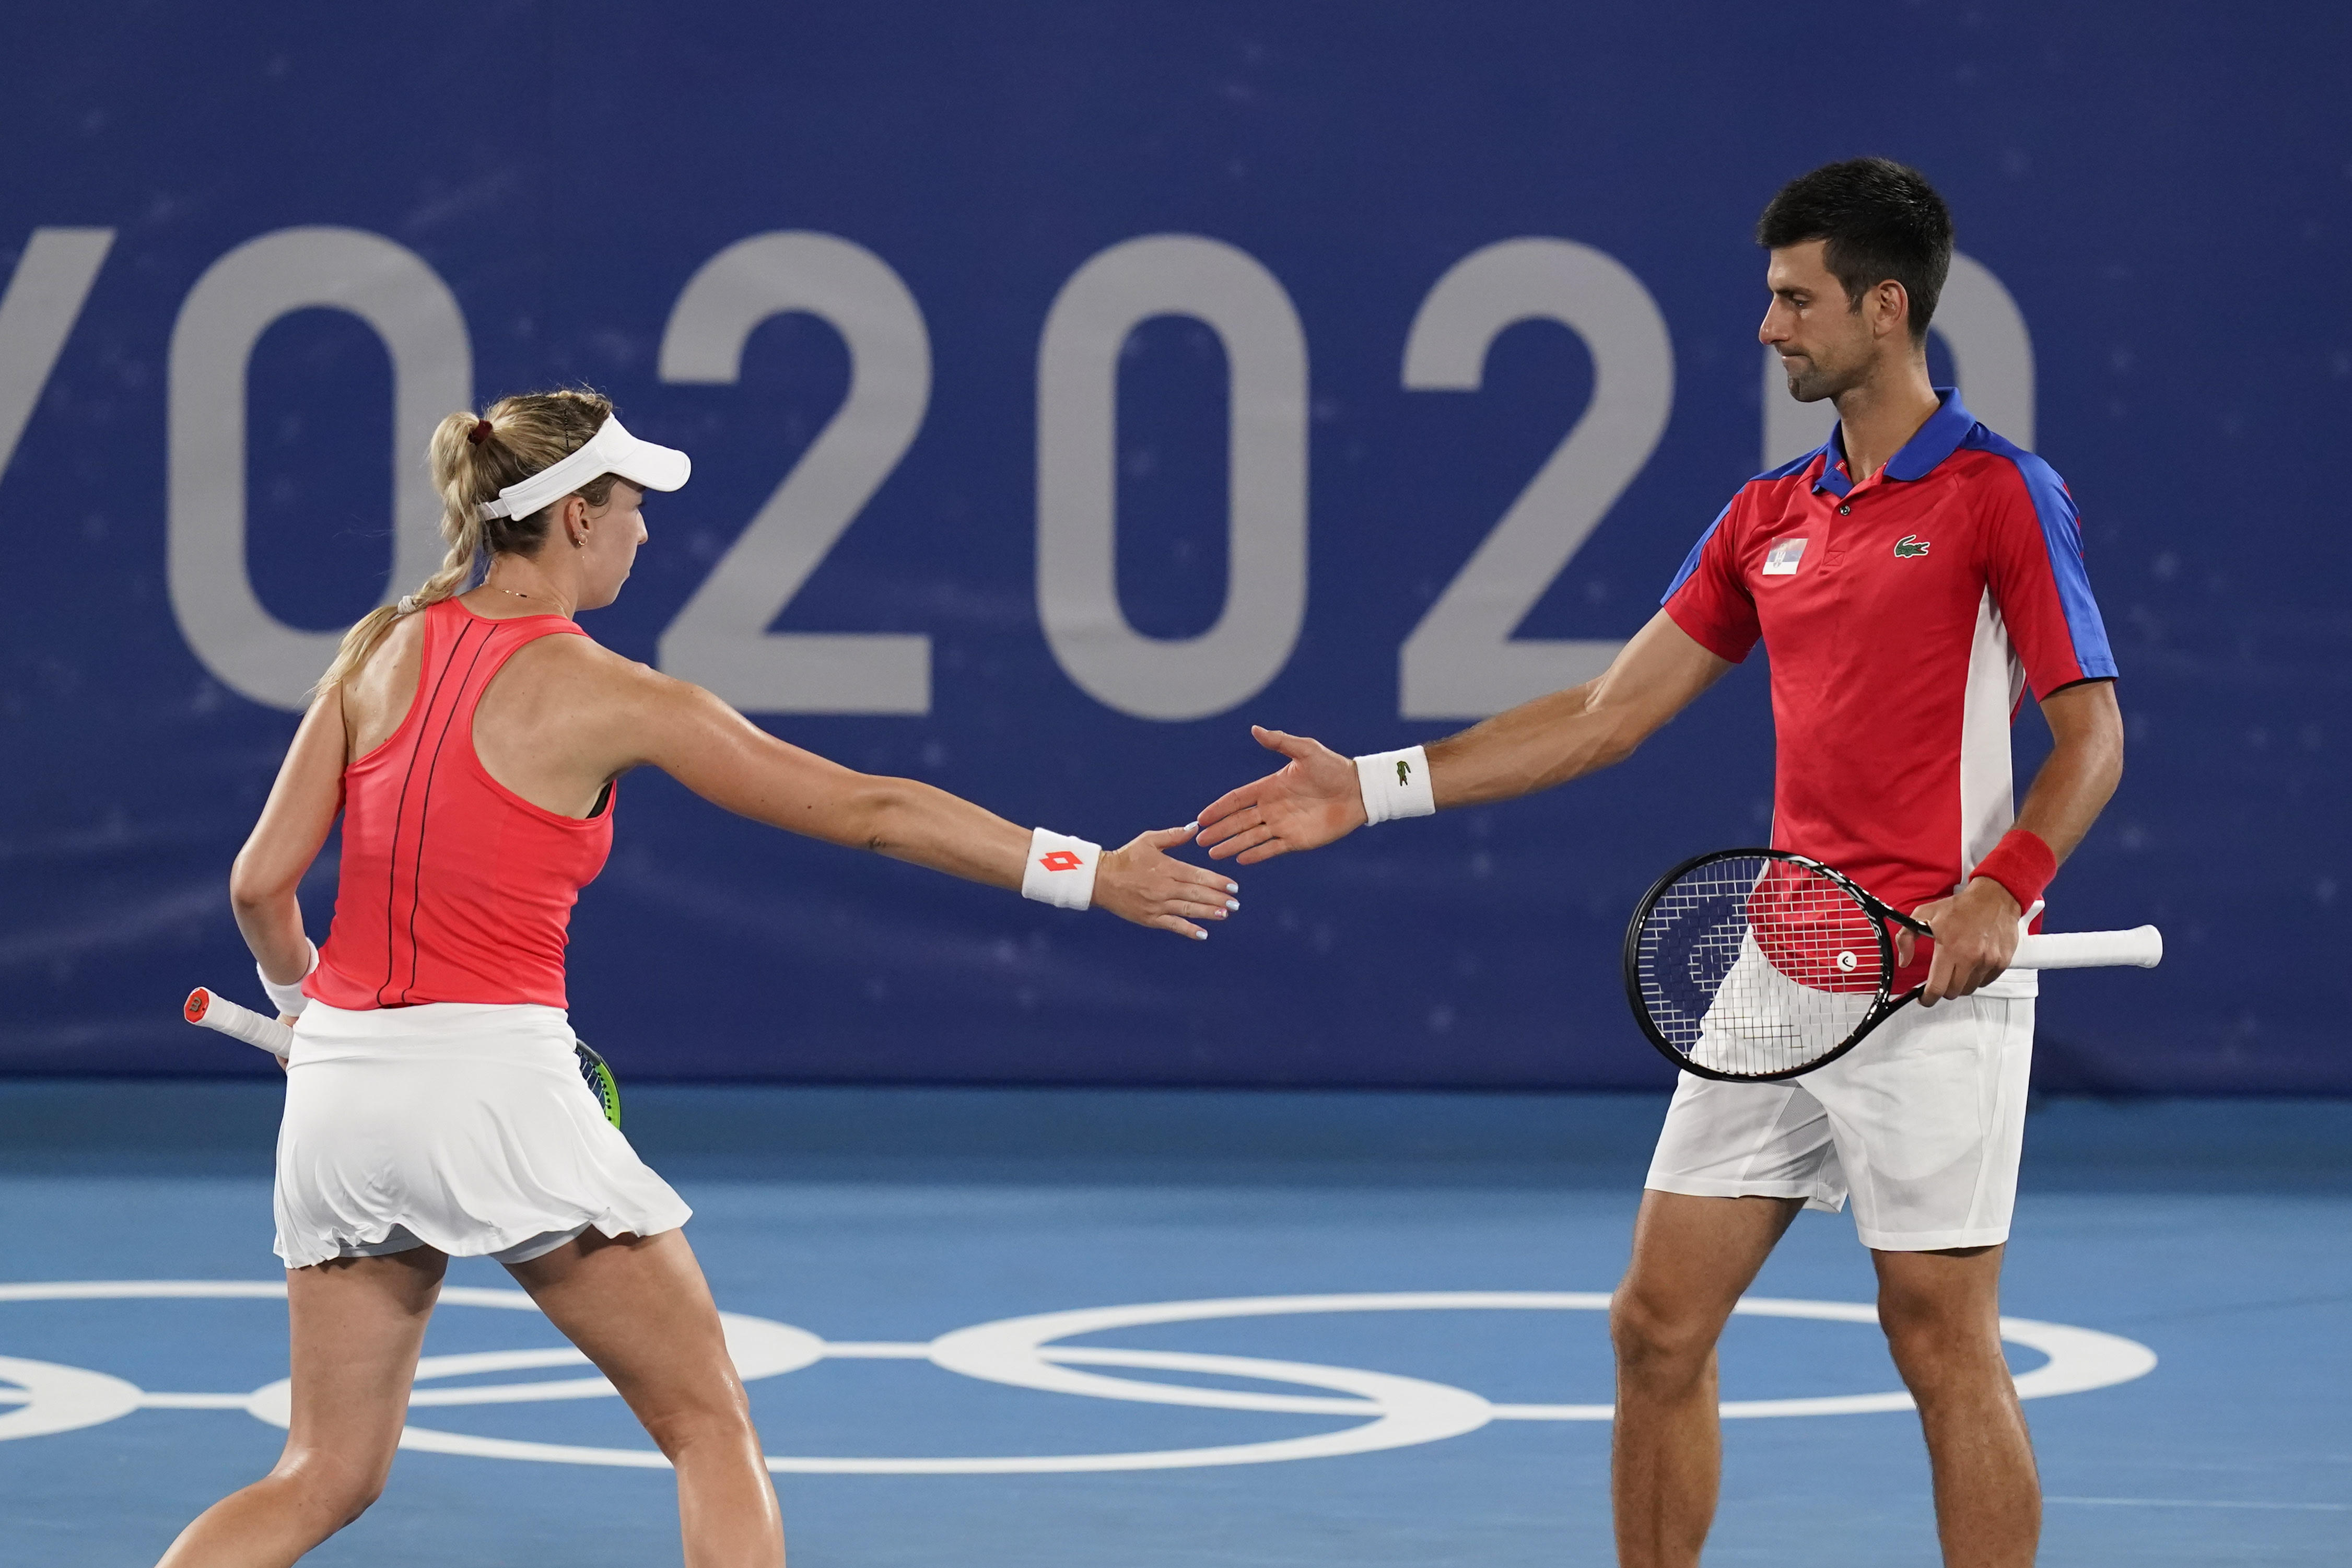 Tennis mixed doubles has its moment at the Olympics | Tennis.com